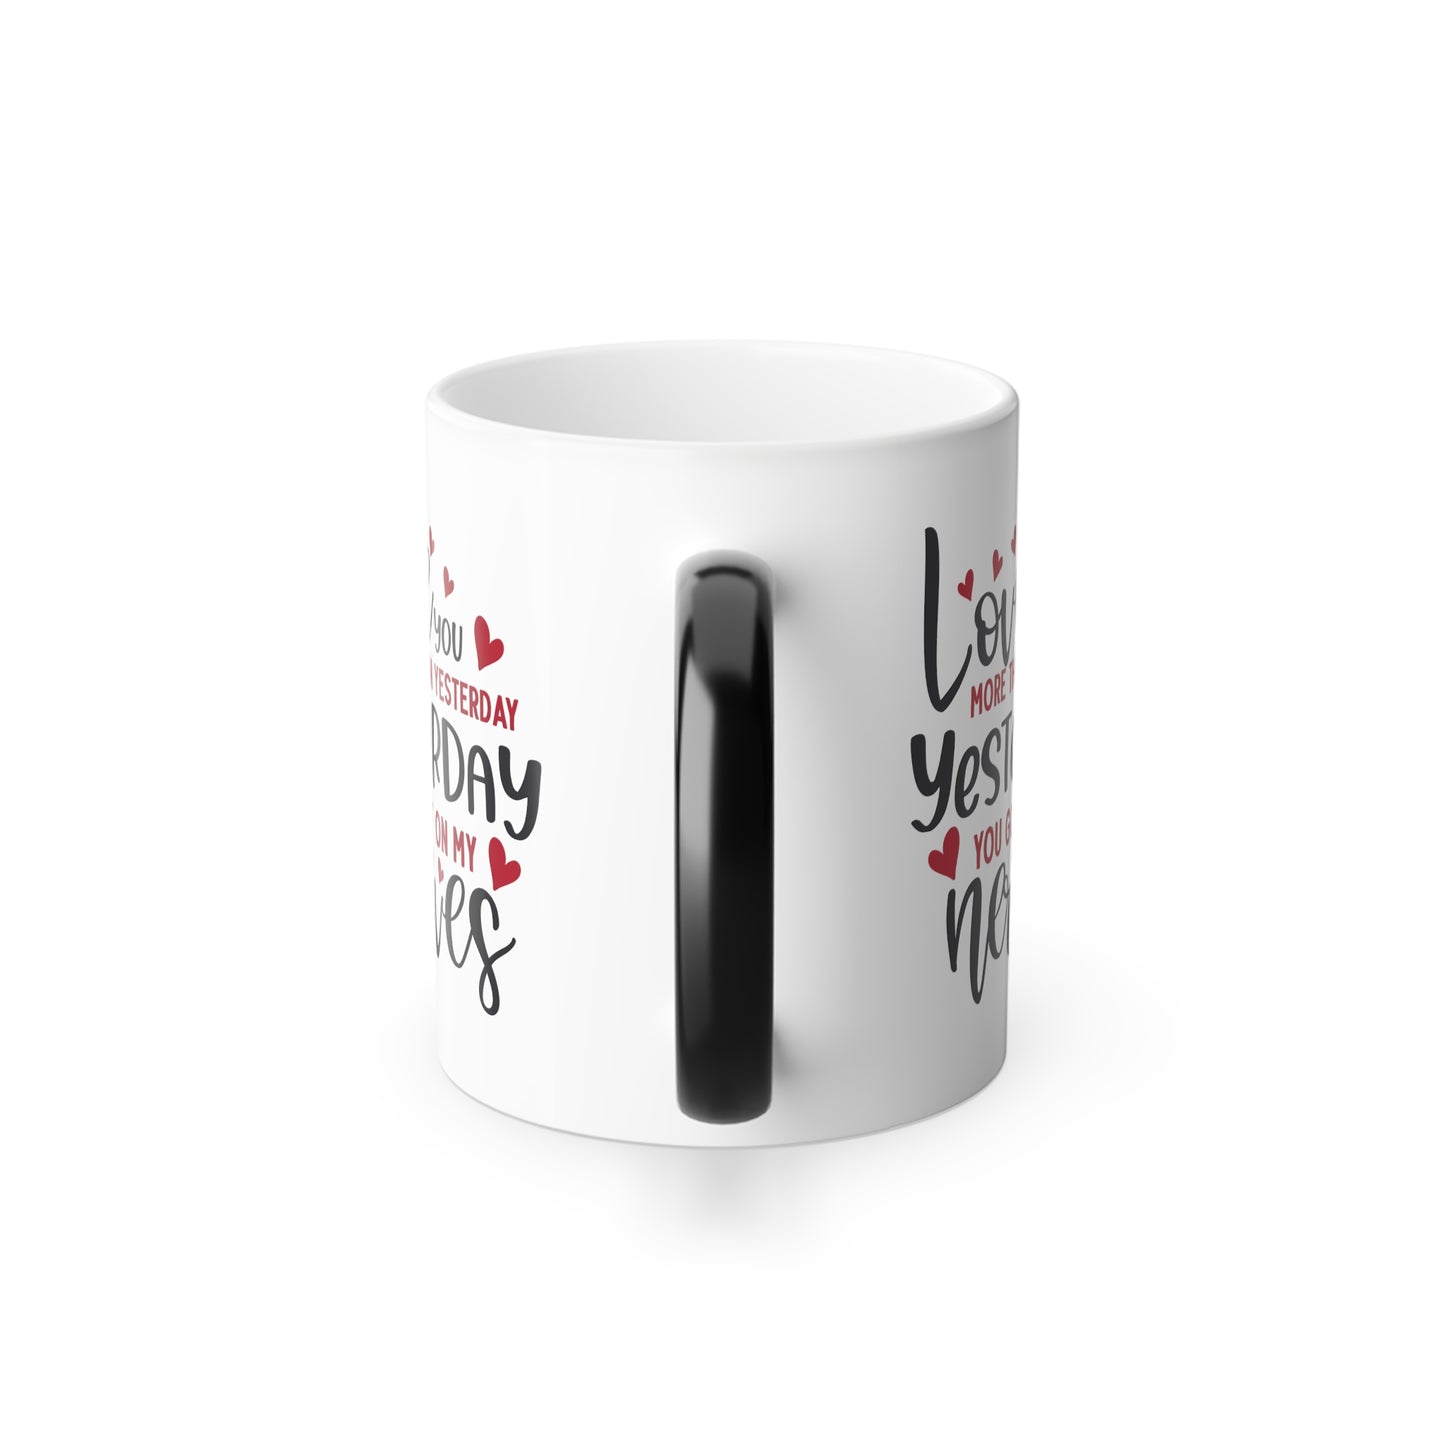 Love You More Than Yesterday Yesterday You Got On My Nerves Color Morphing Mug, 11oz